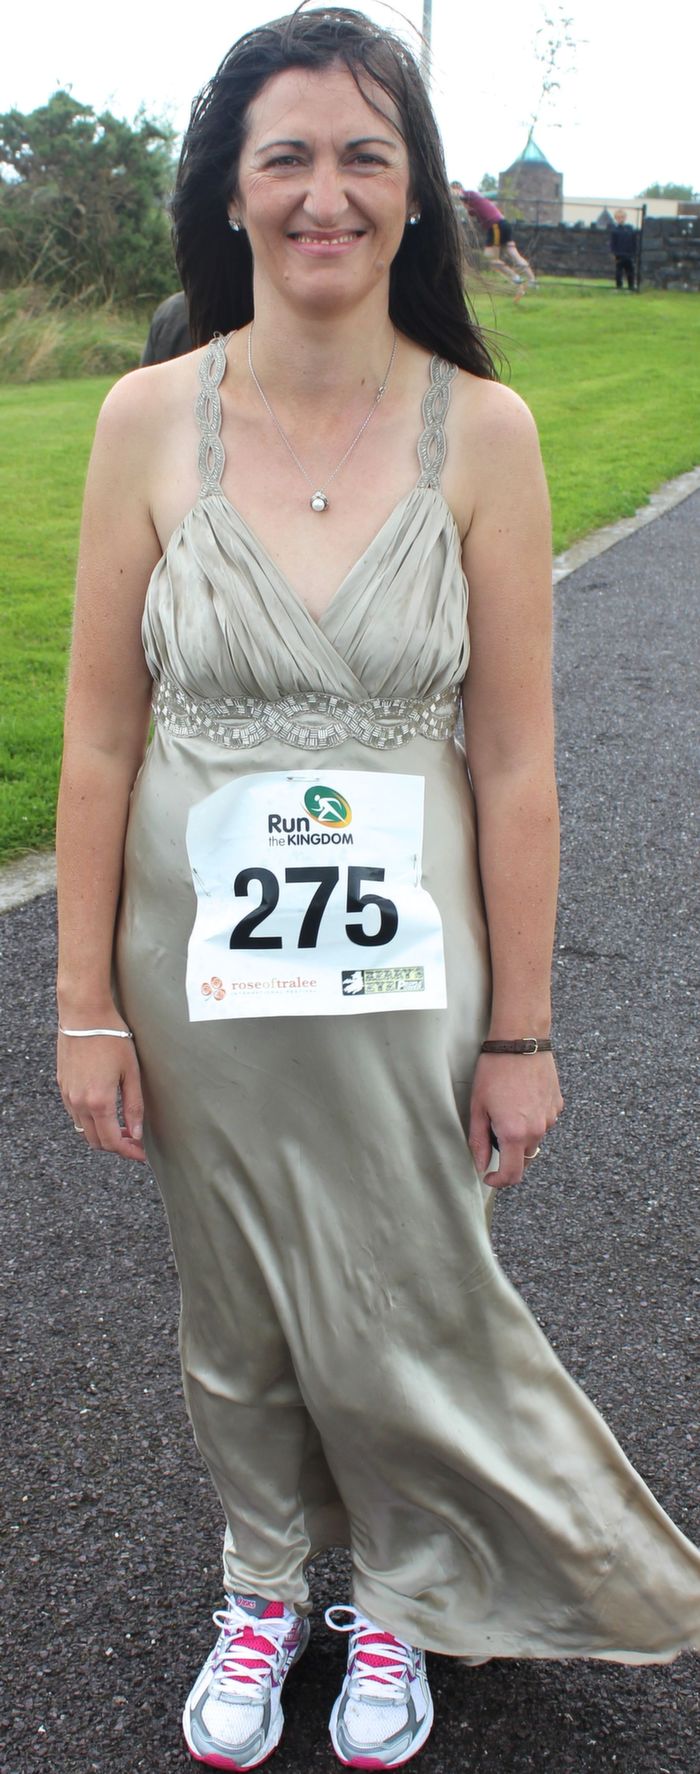 Patricia Hannon, Kilflynn, running as a 'Rose' before the start of the Rose Of Tralee 10k run from Tralee Wetlands on Sunday. Photo by Dermot Crean